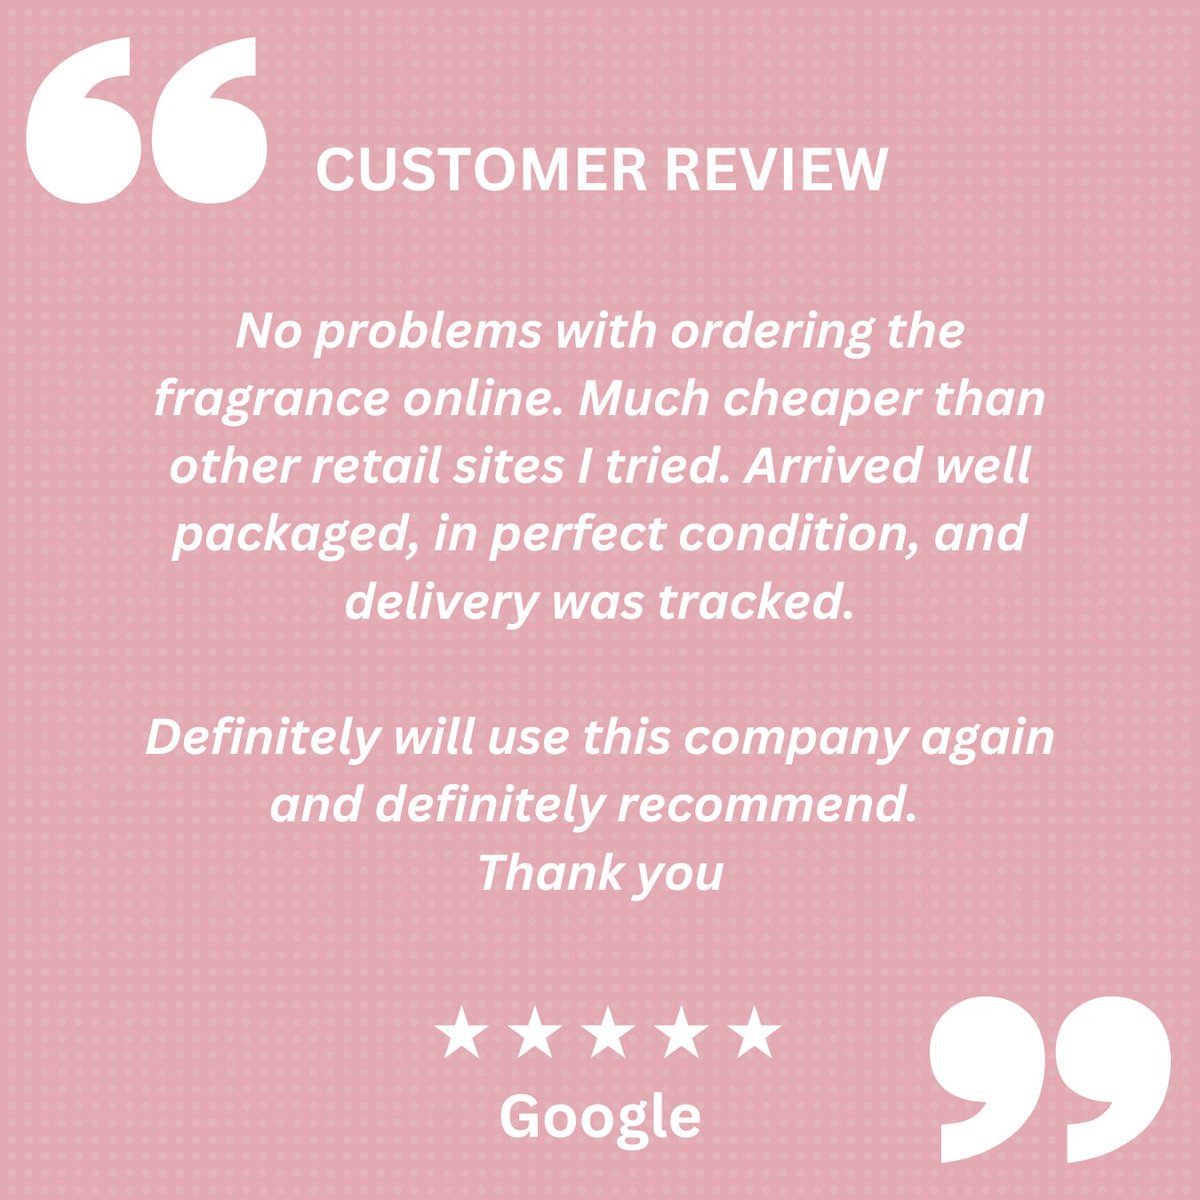 A happy customer and ⭐⭐⭐⭐⭐ Google review! 

#googlereview #fivestarreview #happycustomer #customerreview #onlineordering #onlineship #skincare #bodycare #fragrances #suncare #pharmacy #vitaltonepharmacy #caterham #chaldon #warlingham #oxted #woldingham #whyteleafe #Surrey